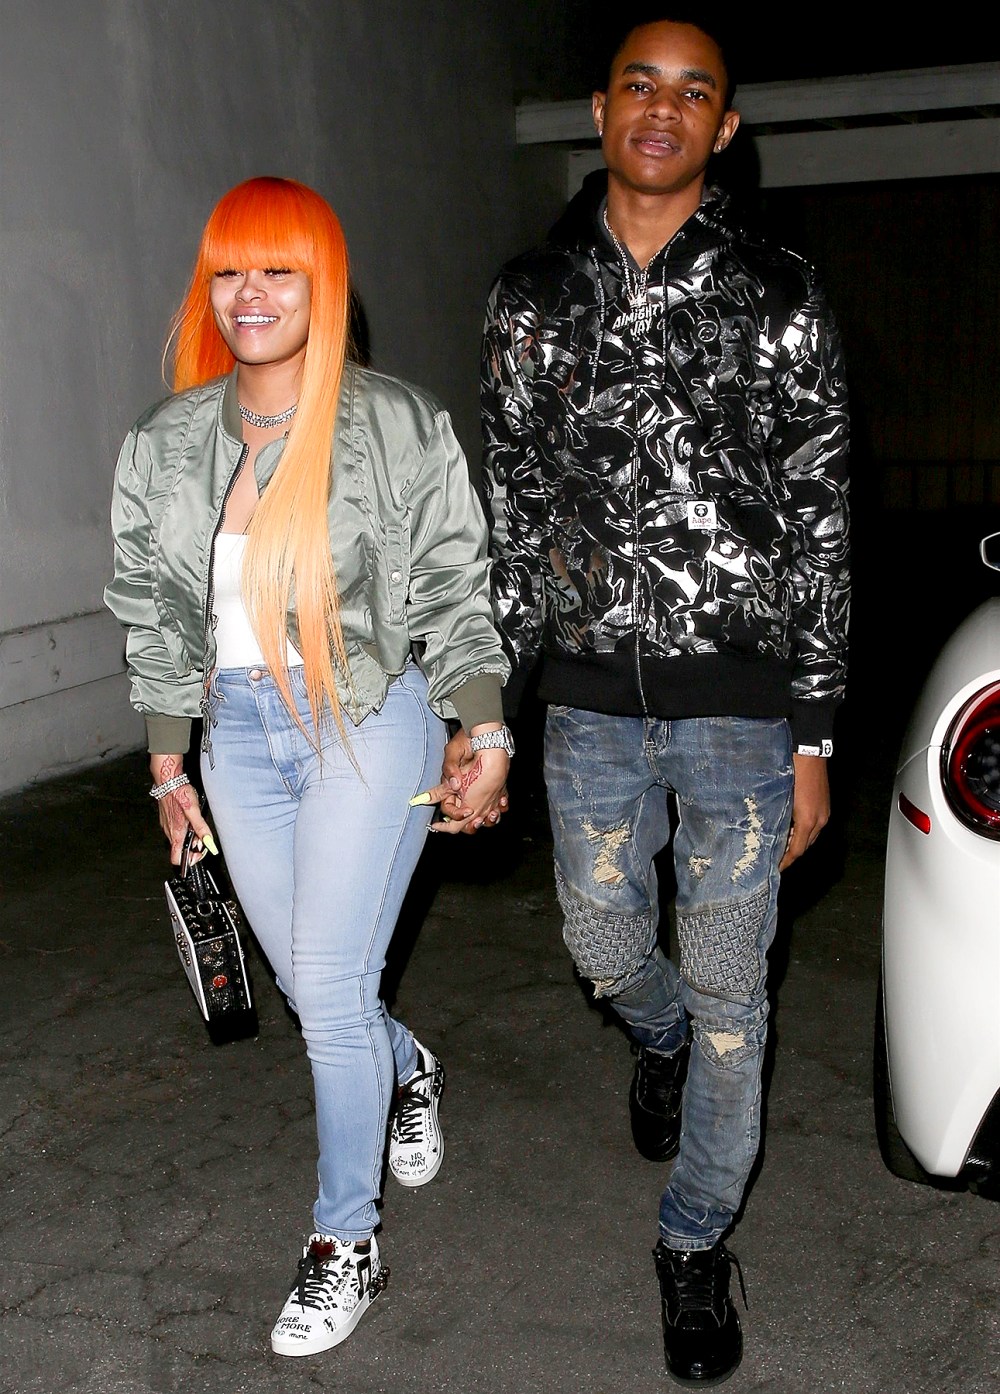 daniel agpoon recommends blac chyna young pictures pic